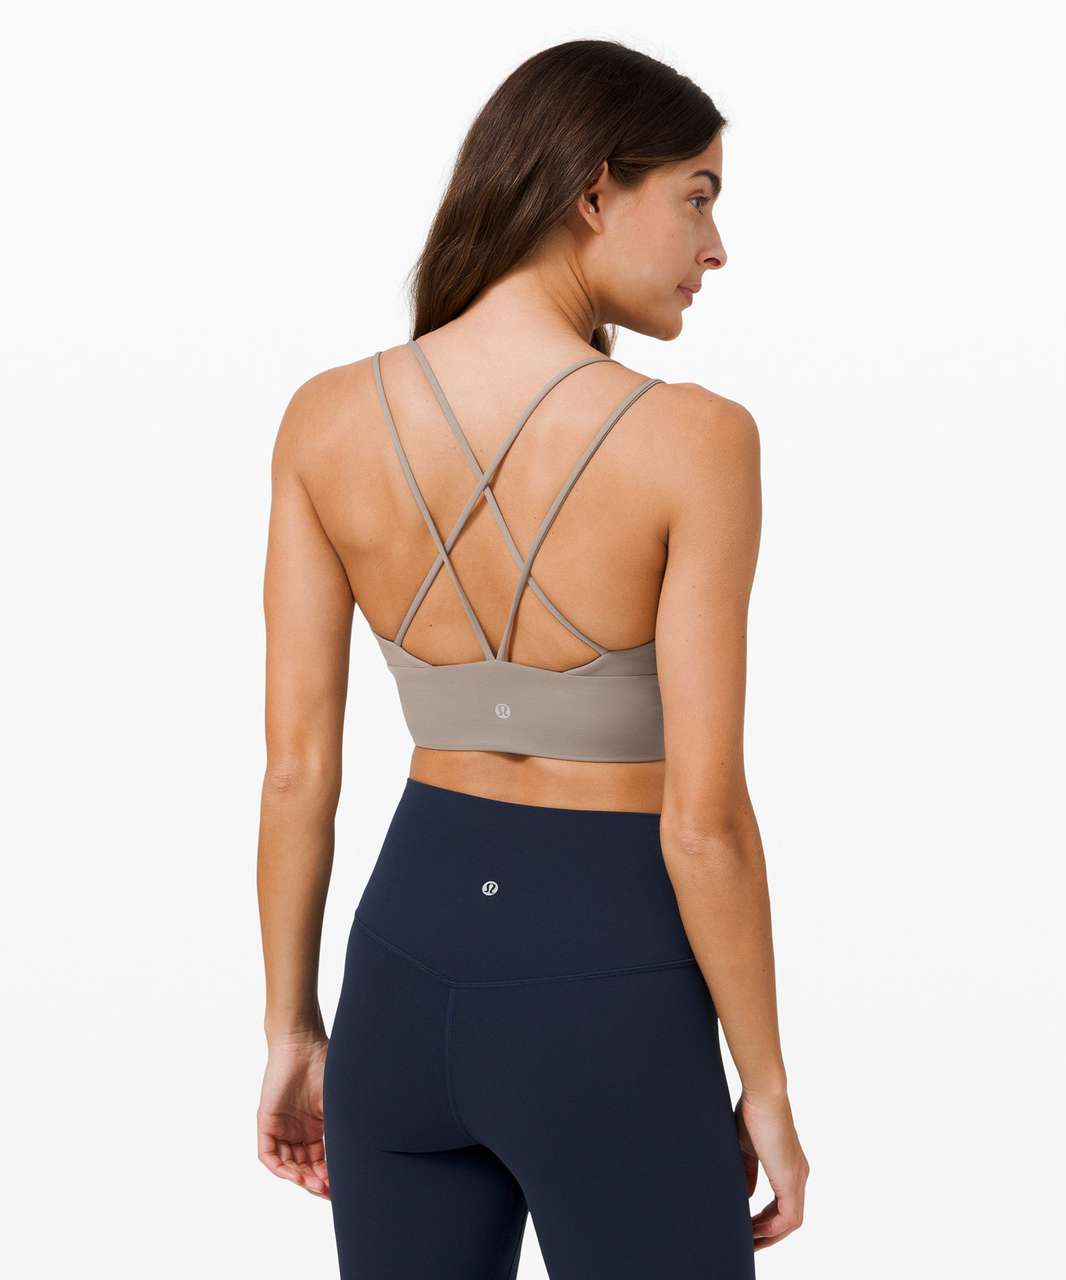 Lululemon Pushing Limits Bra *Light Support, A/B Cup - Carbon Dust ...